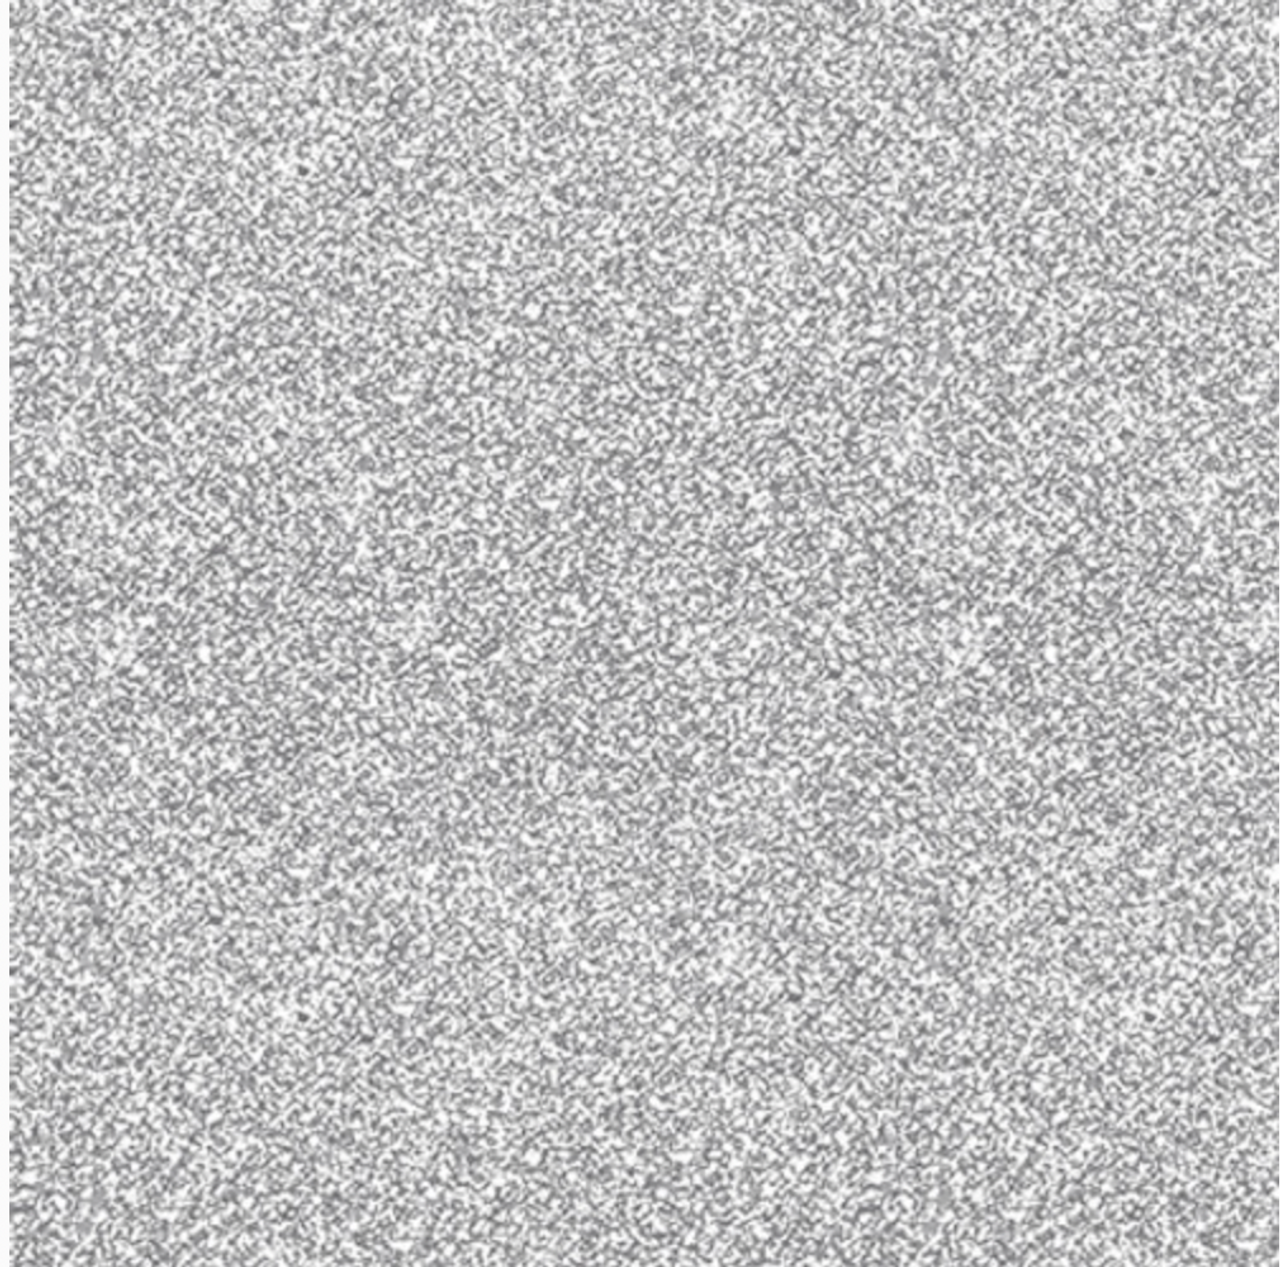 Henry Glass Twinkle Printed Glitter Gray Fabric By The Yard